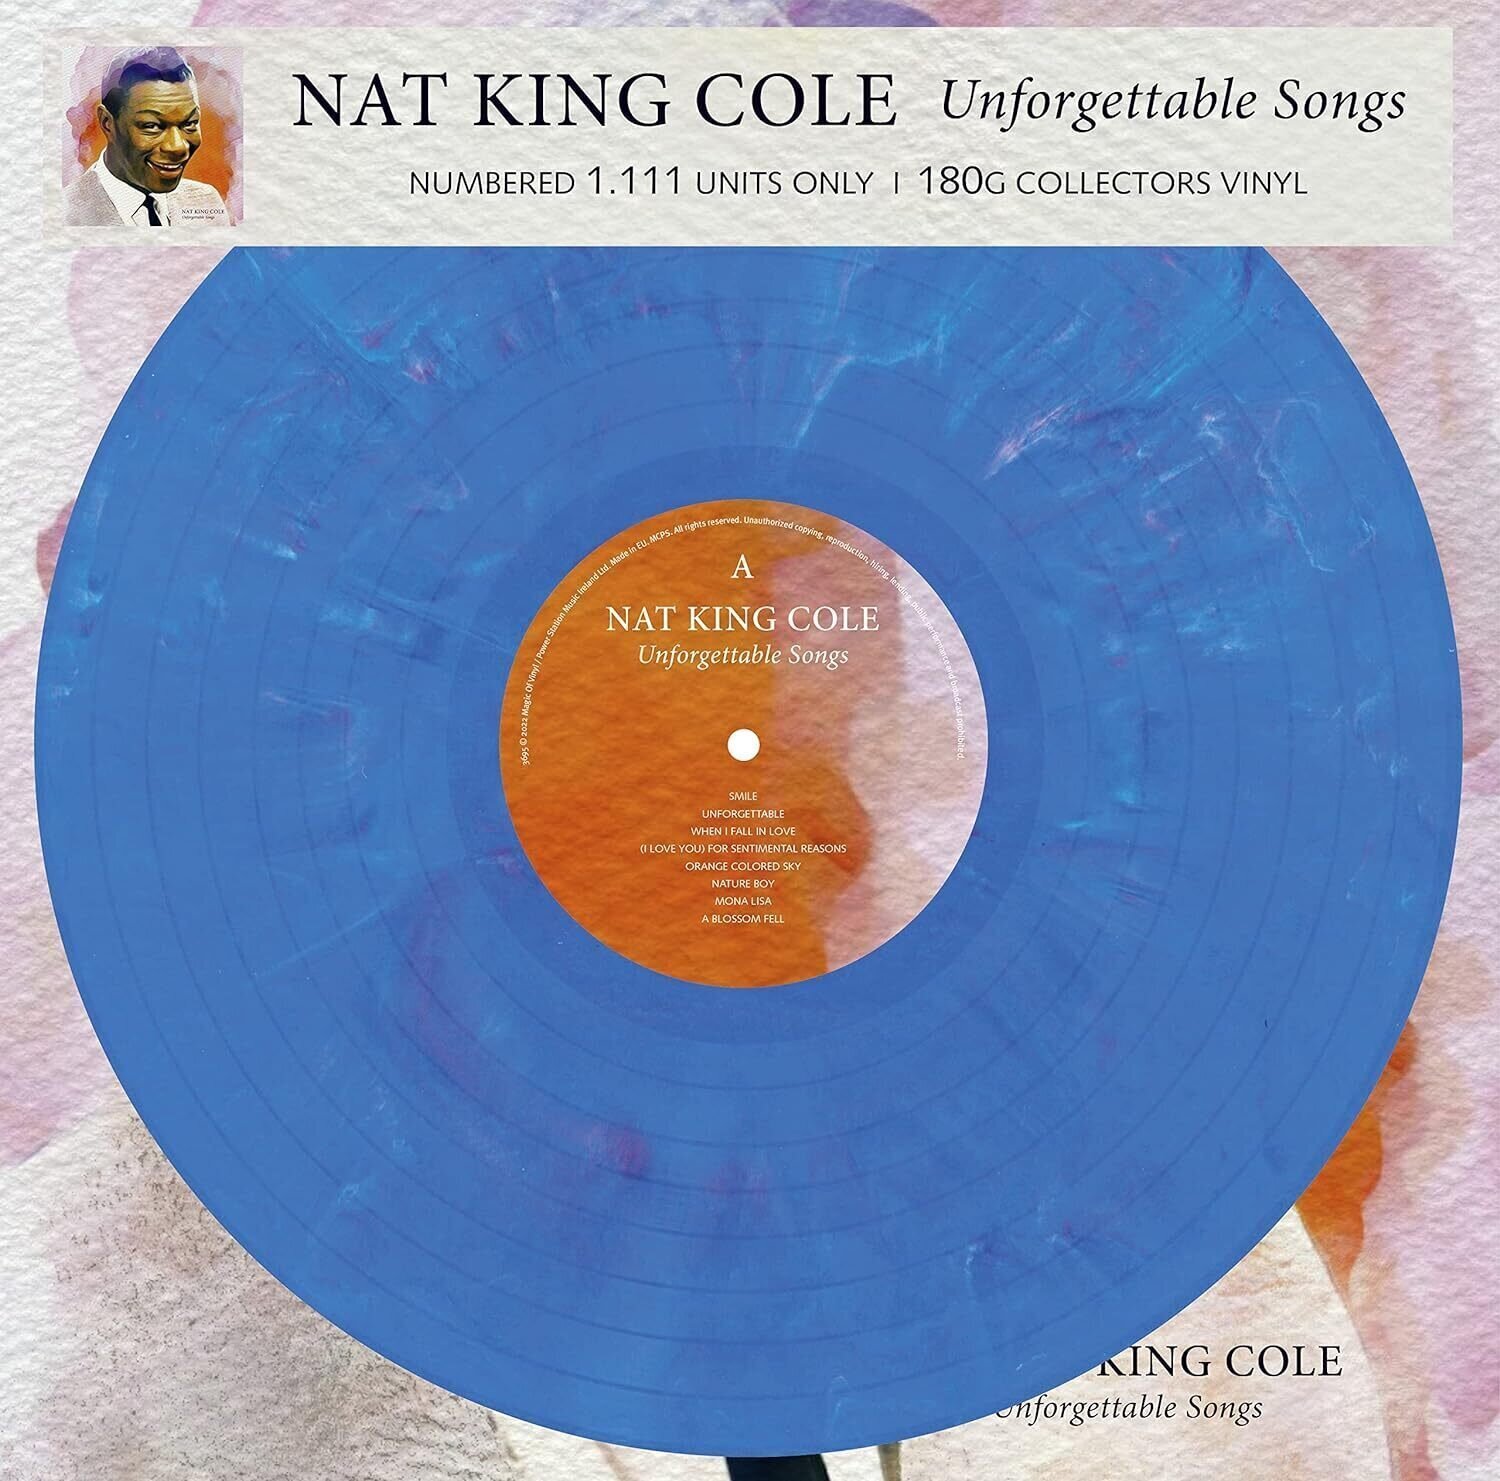 LP deska Nat King Cole - Unforgettable Songs (Limited Edition) (Numbered) (Blue Marbled Coloured) (LP)